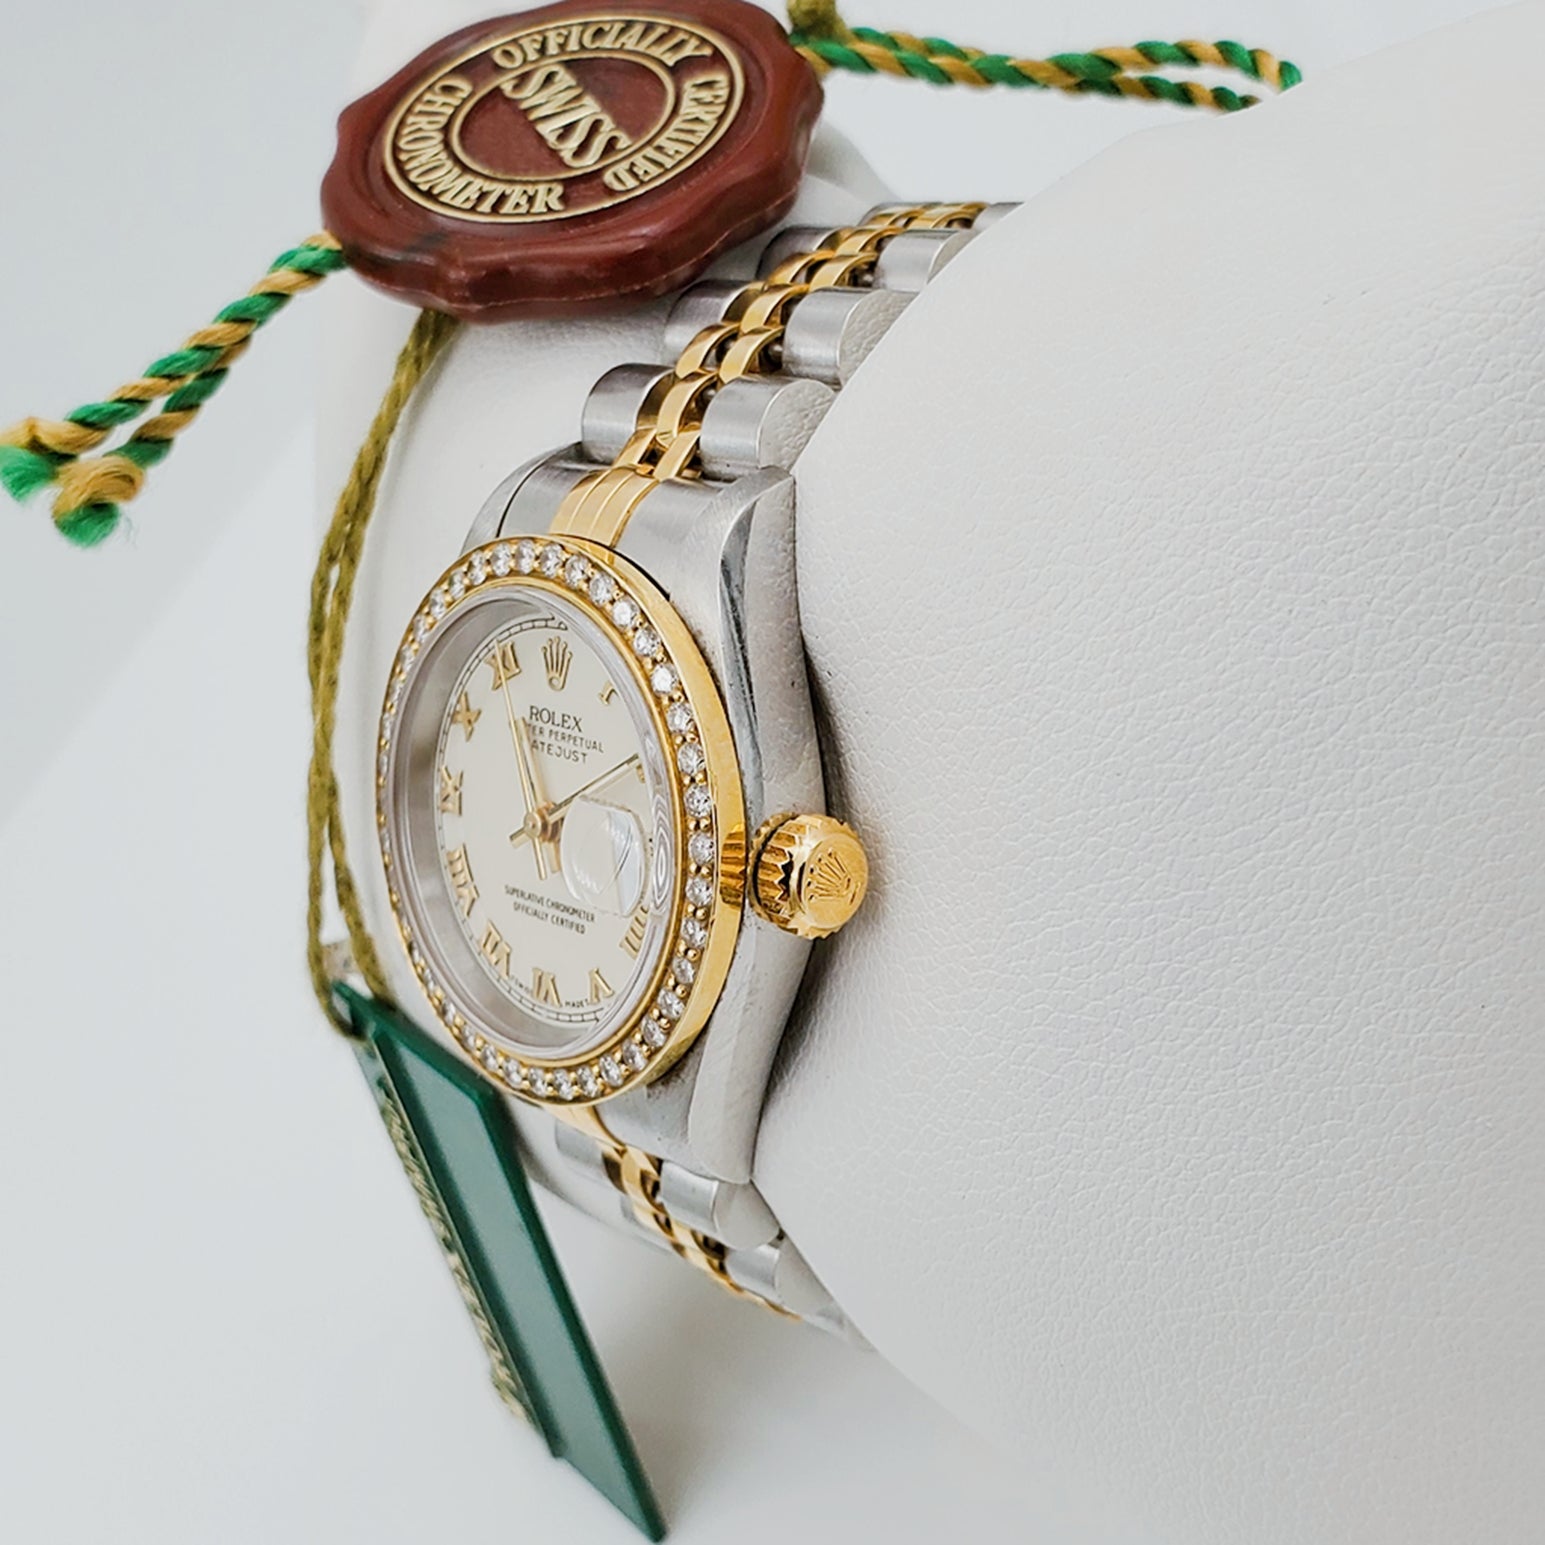 Women's Rolex 18K Gold Two-Tone 26mm DateJust Watch with Off-White Dial, Roman Numerals and Diamond Bezel. (Pre-Owned)